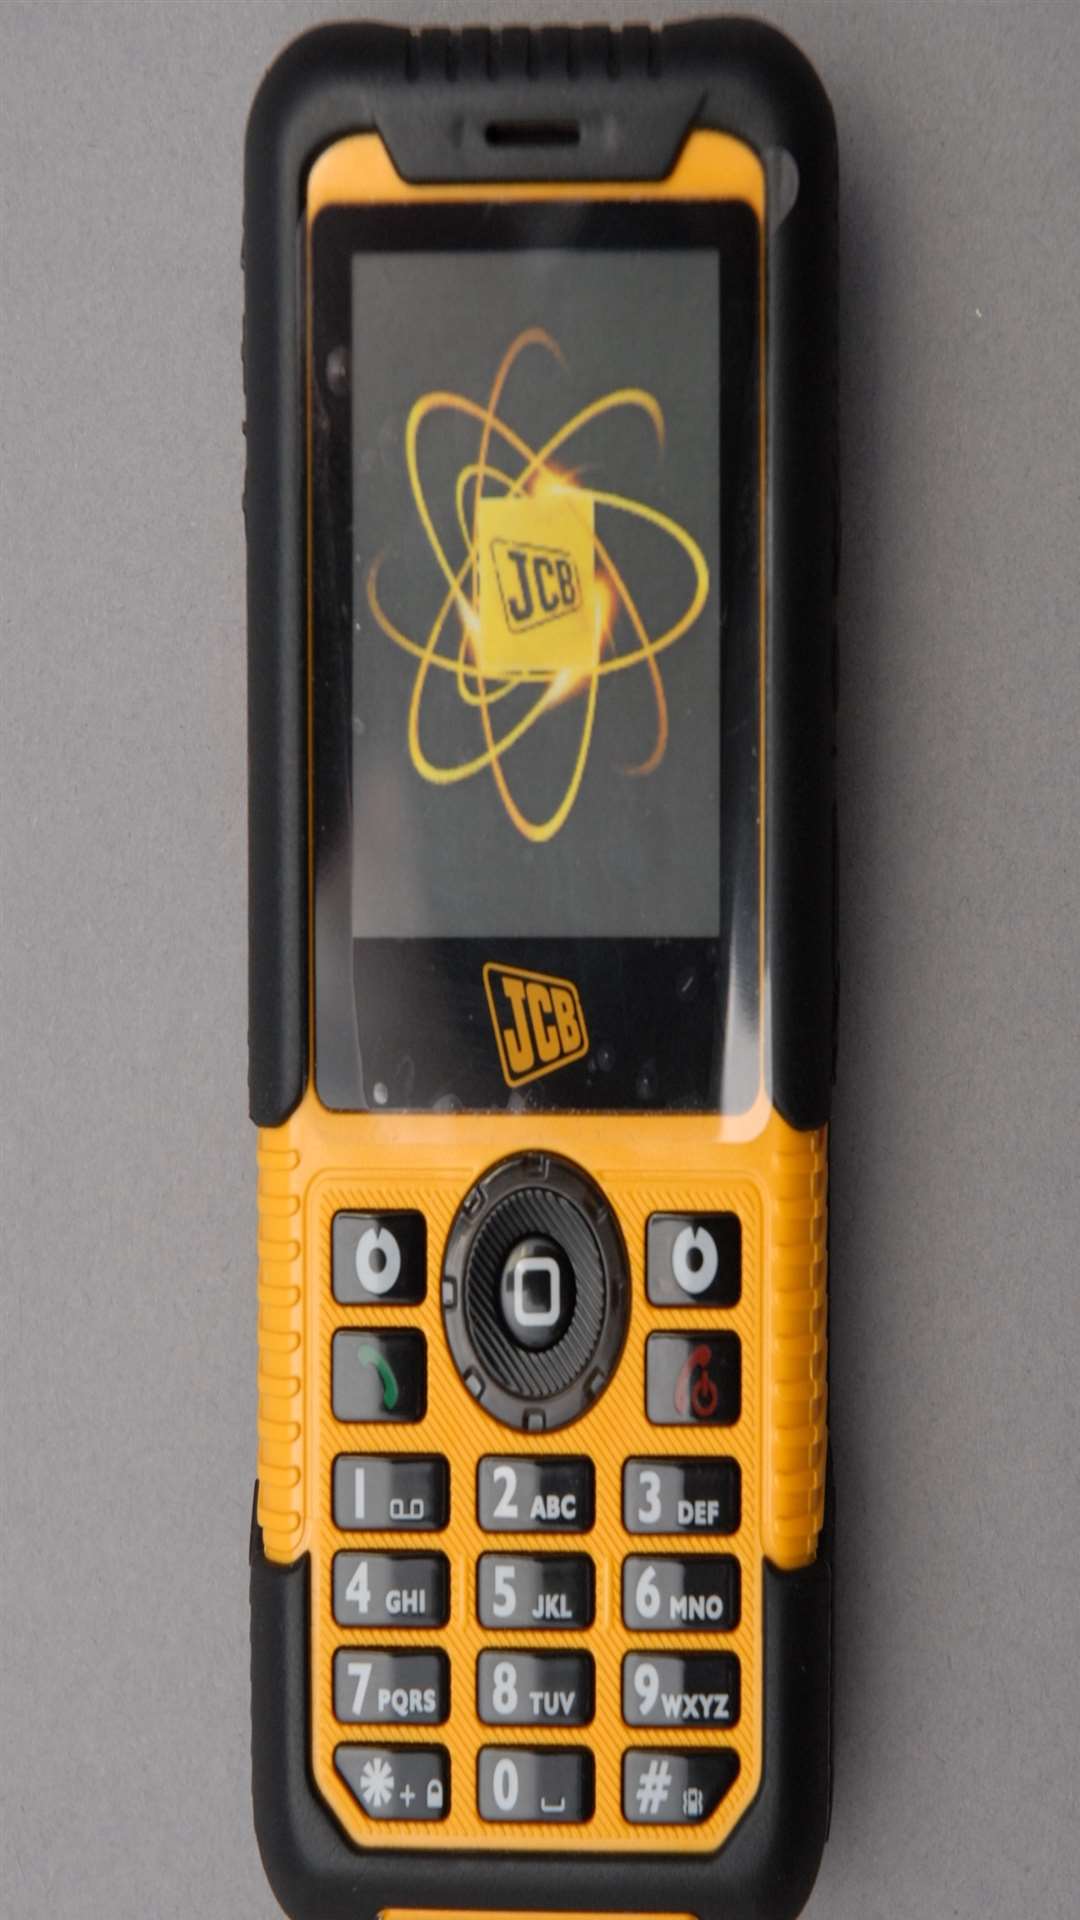 Police are searching for a distinctive mobile phone. They have released this picture of a replica device